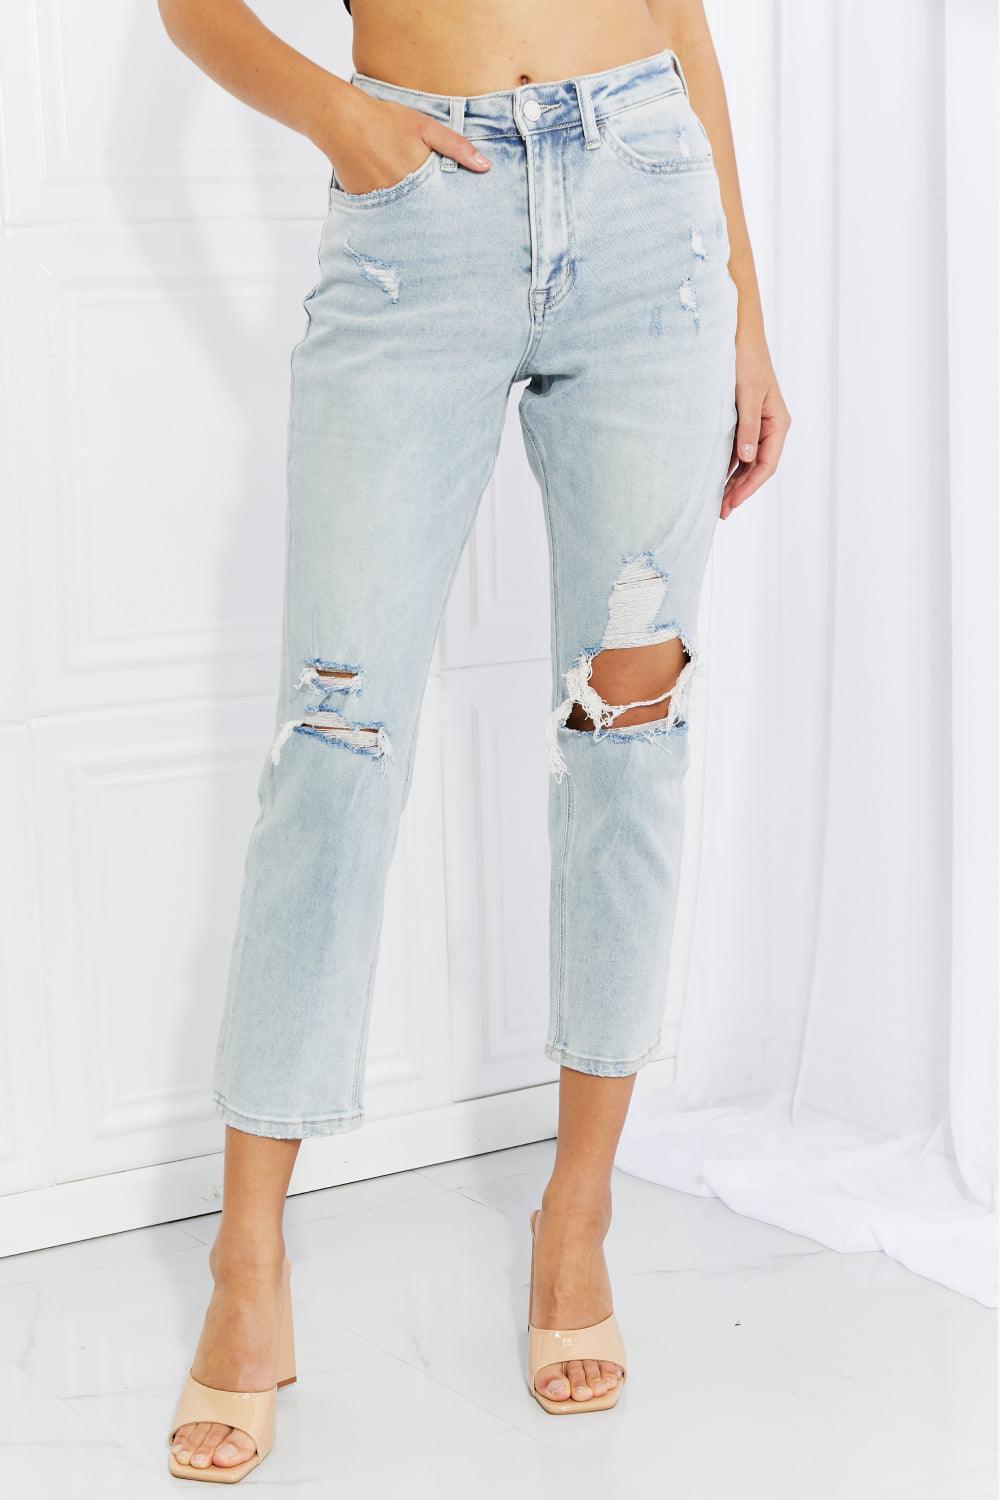 One's Best Distressed Cropped Mid Waist Jeans - MXSTUDIO.COM